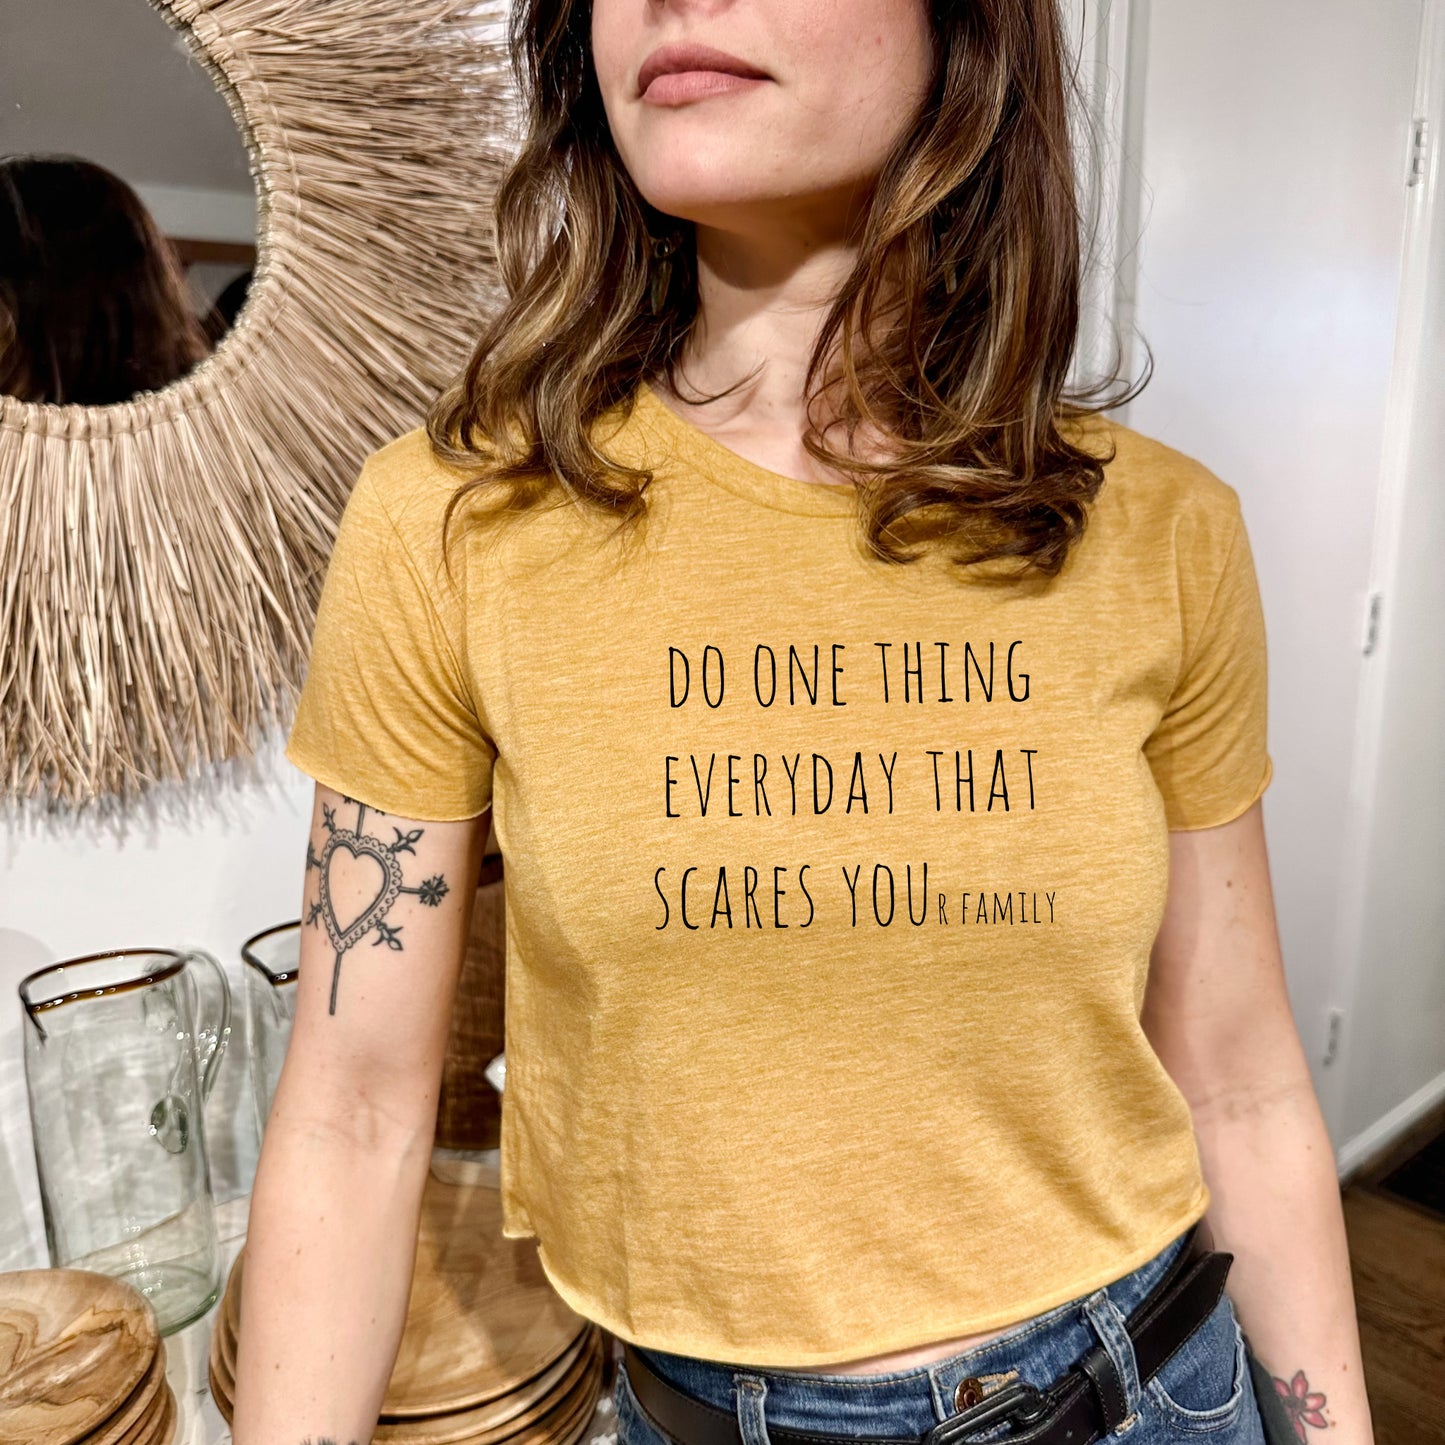 Do One Thing Every Day That Scares Your Family - Women's Crop Tee - Heather Gray or Gold